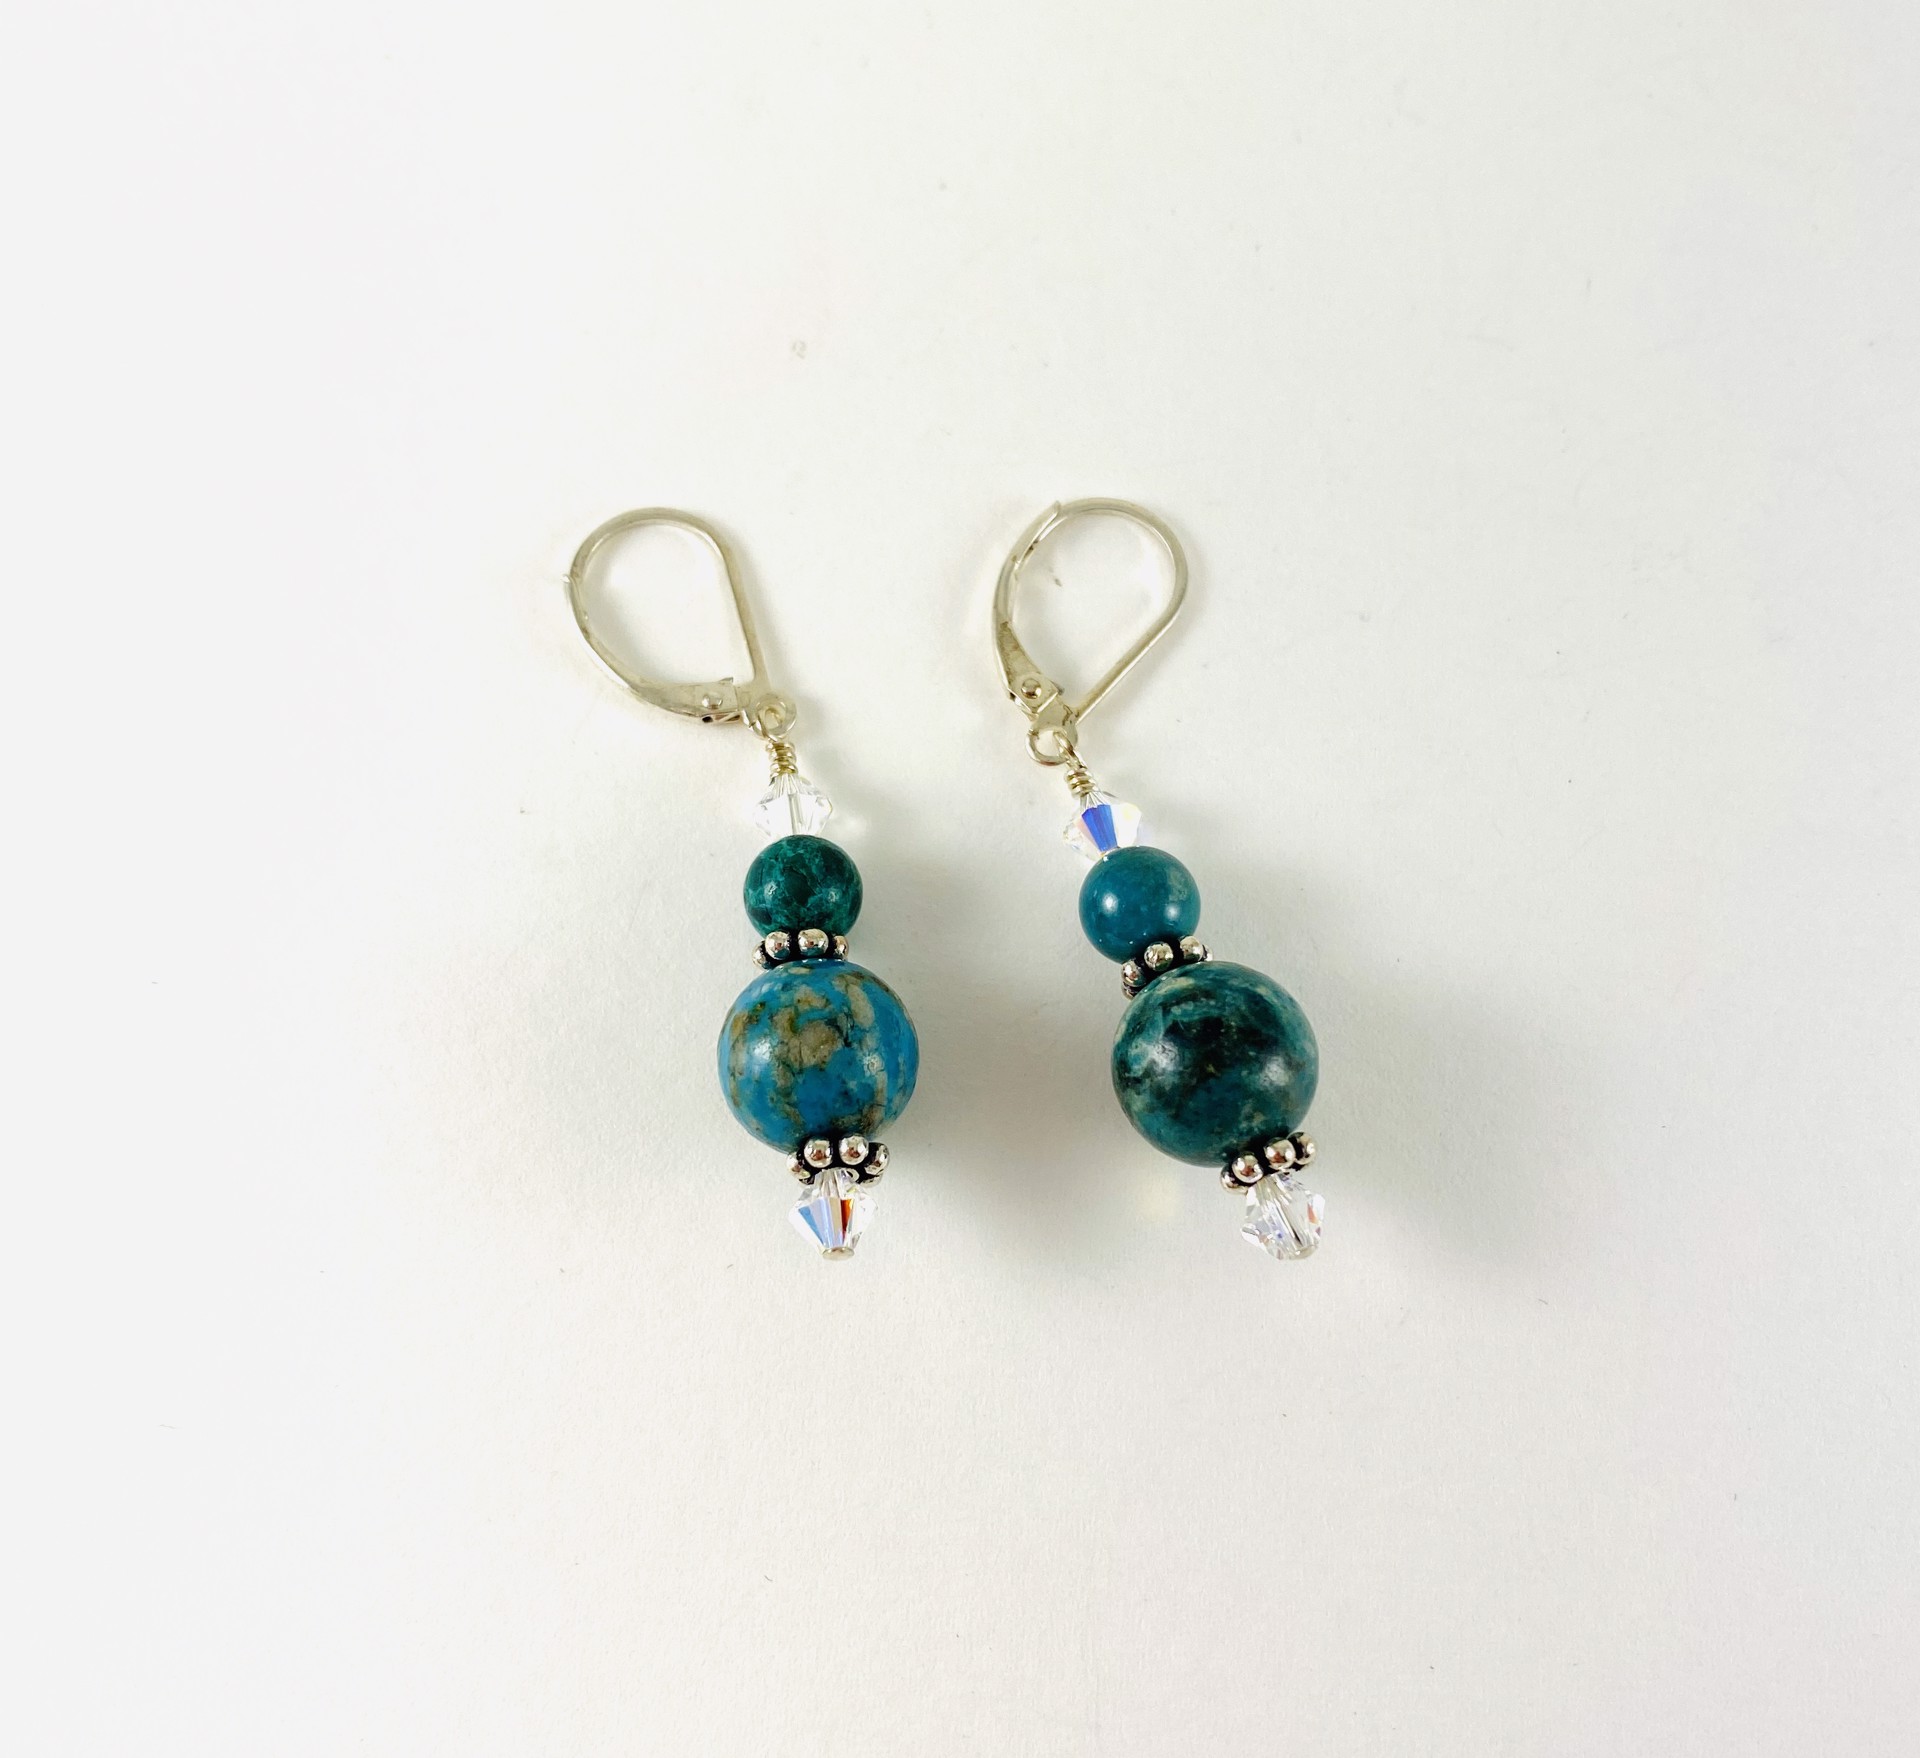 SHOSH19-6 Turquoise, Crystal, Silver Earrings by Shoshannah Weinisch